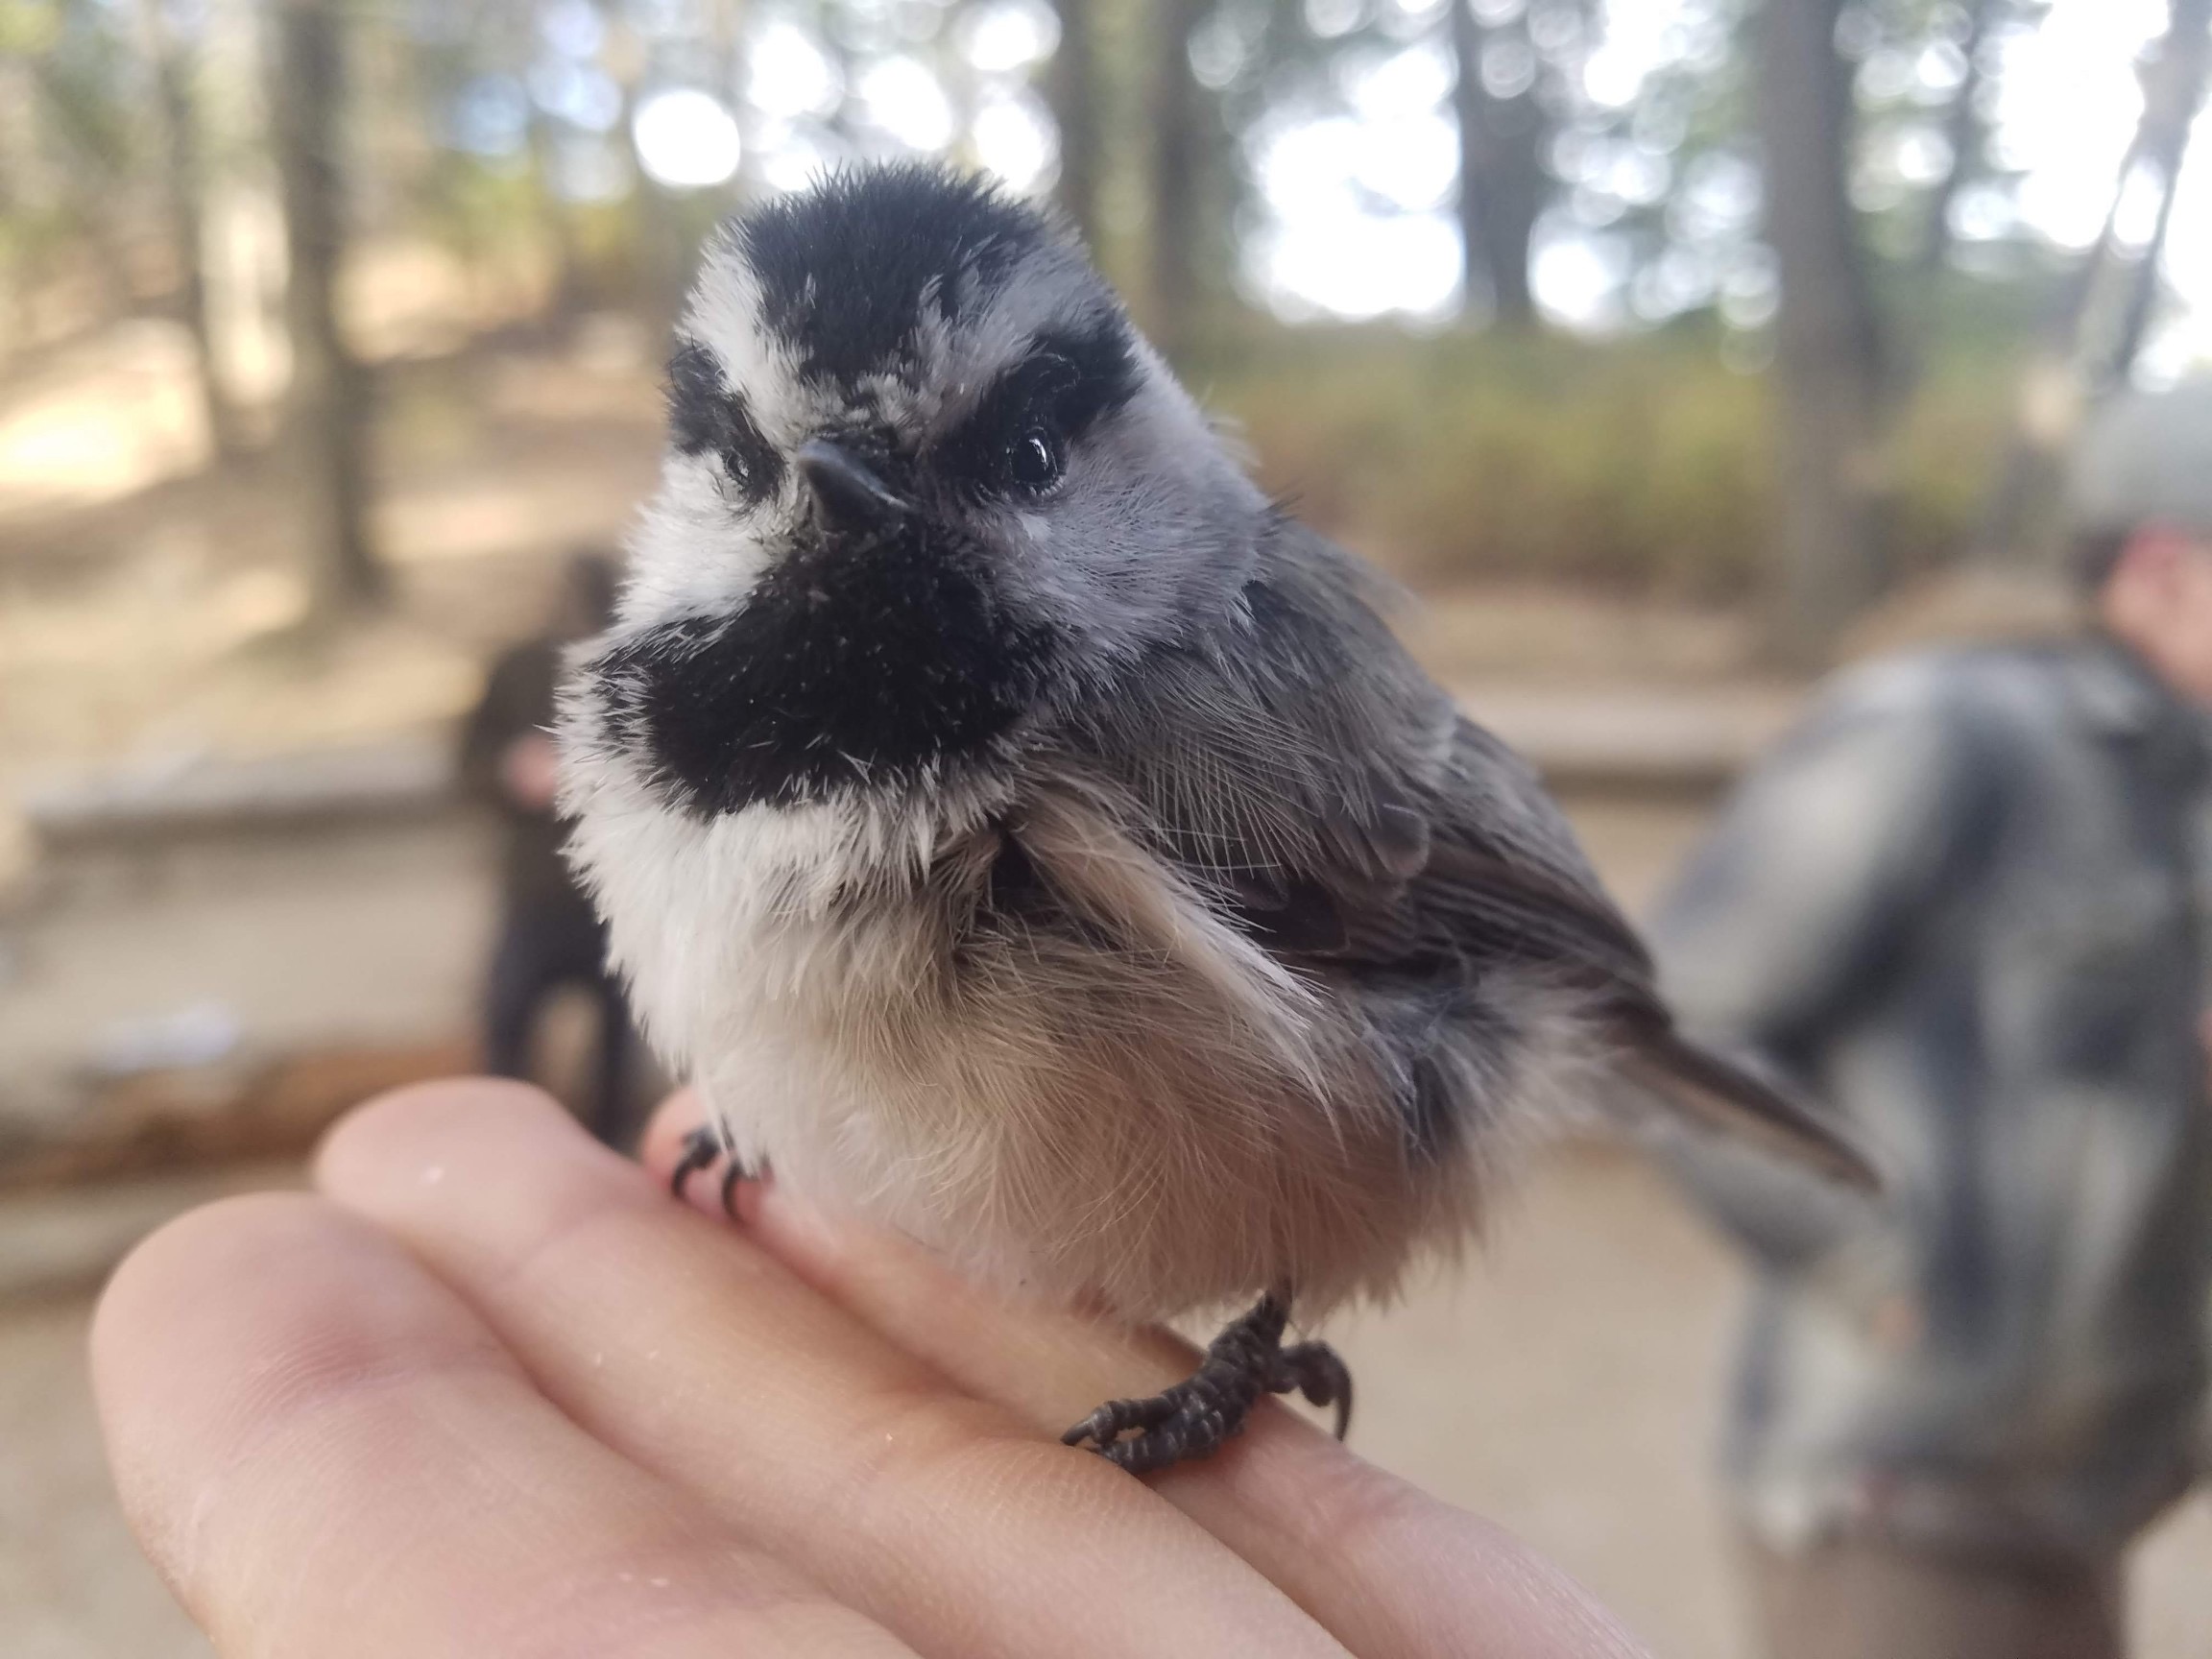 a small chickadee sits on an open hand